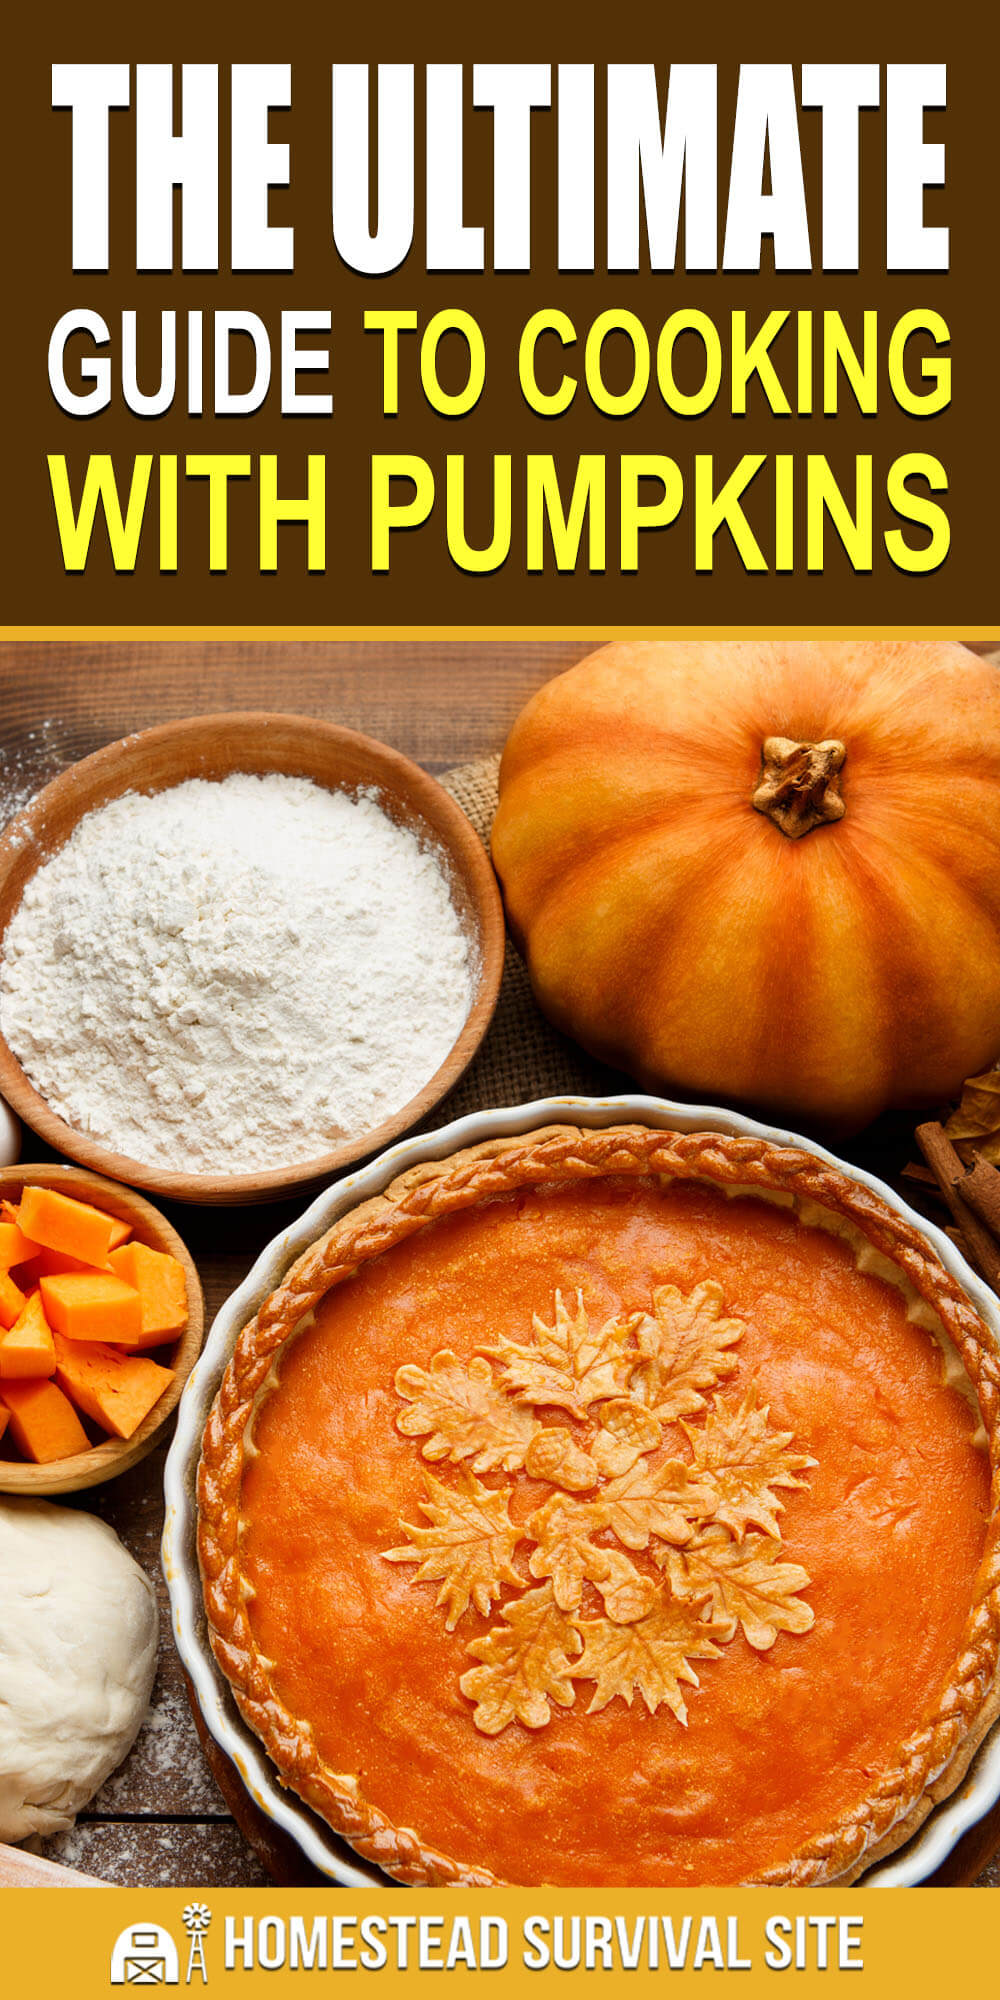 The Ultimate Guide To Cooking With Pumpkins